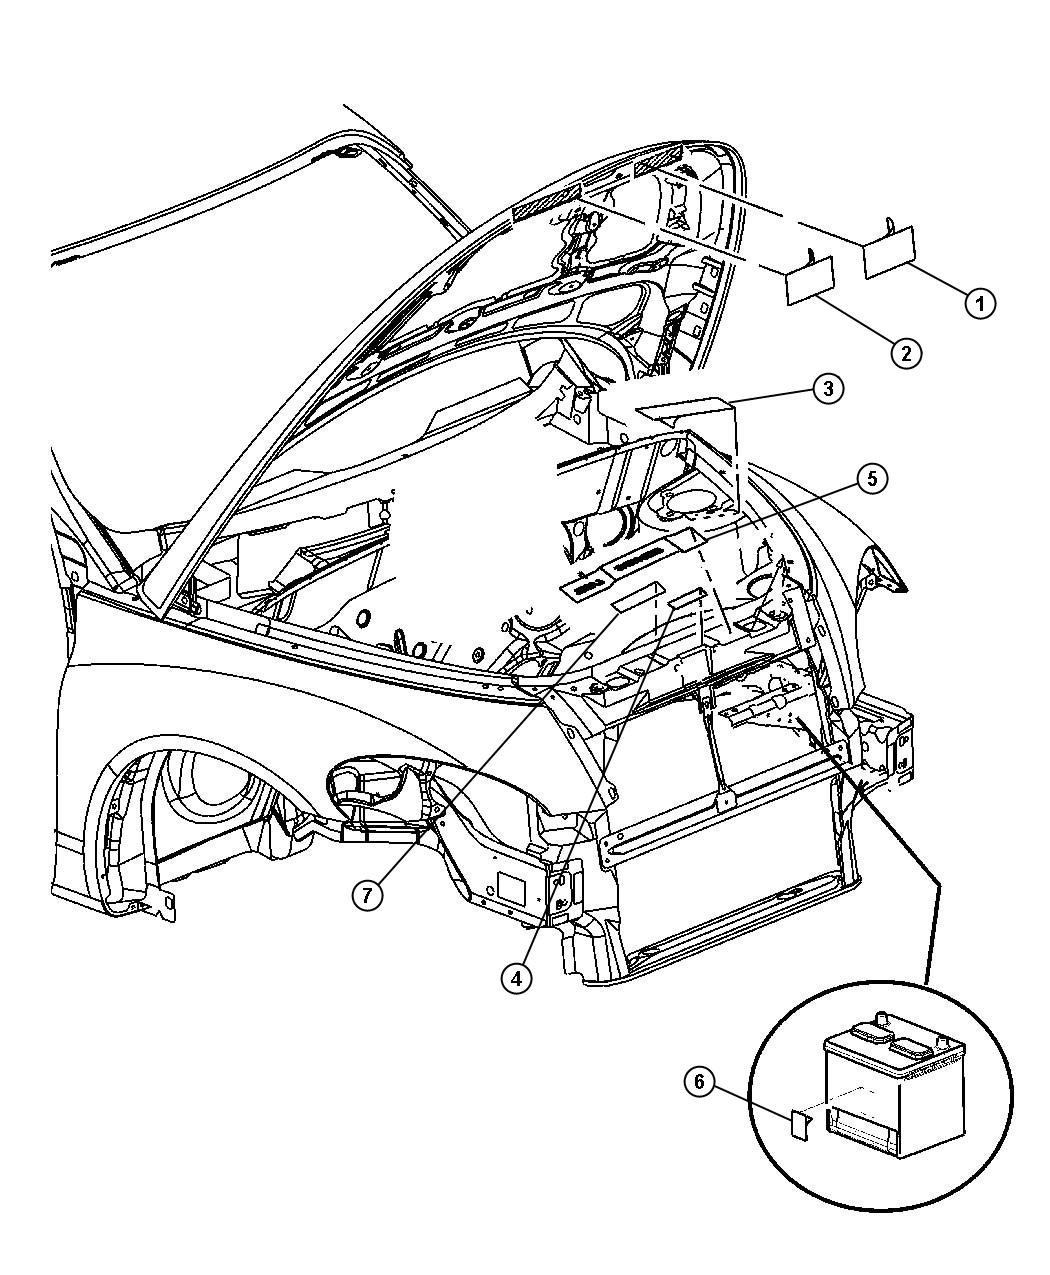 Show Picture Of 2006 2 4l Pt Cruiser Wiring Diagram